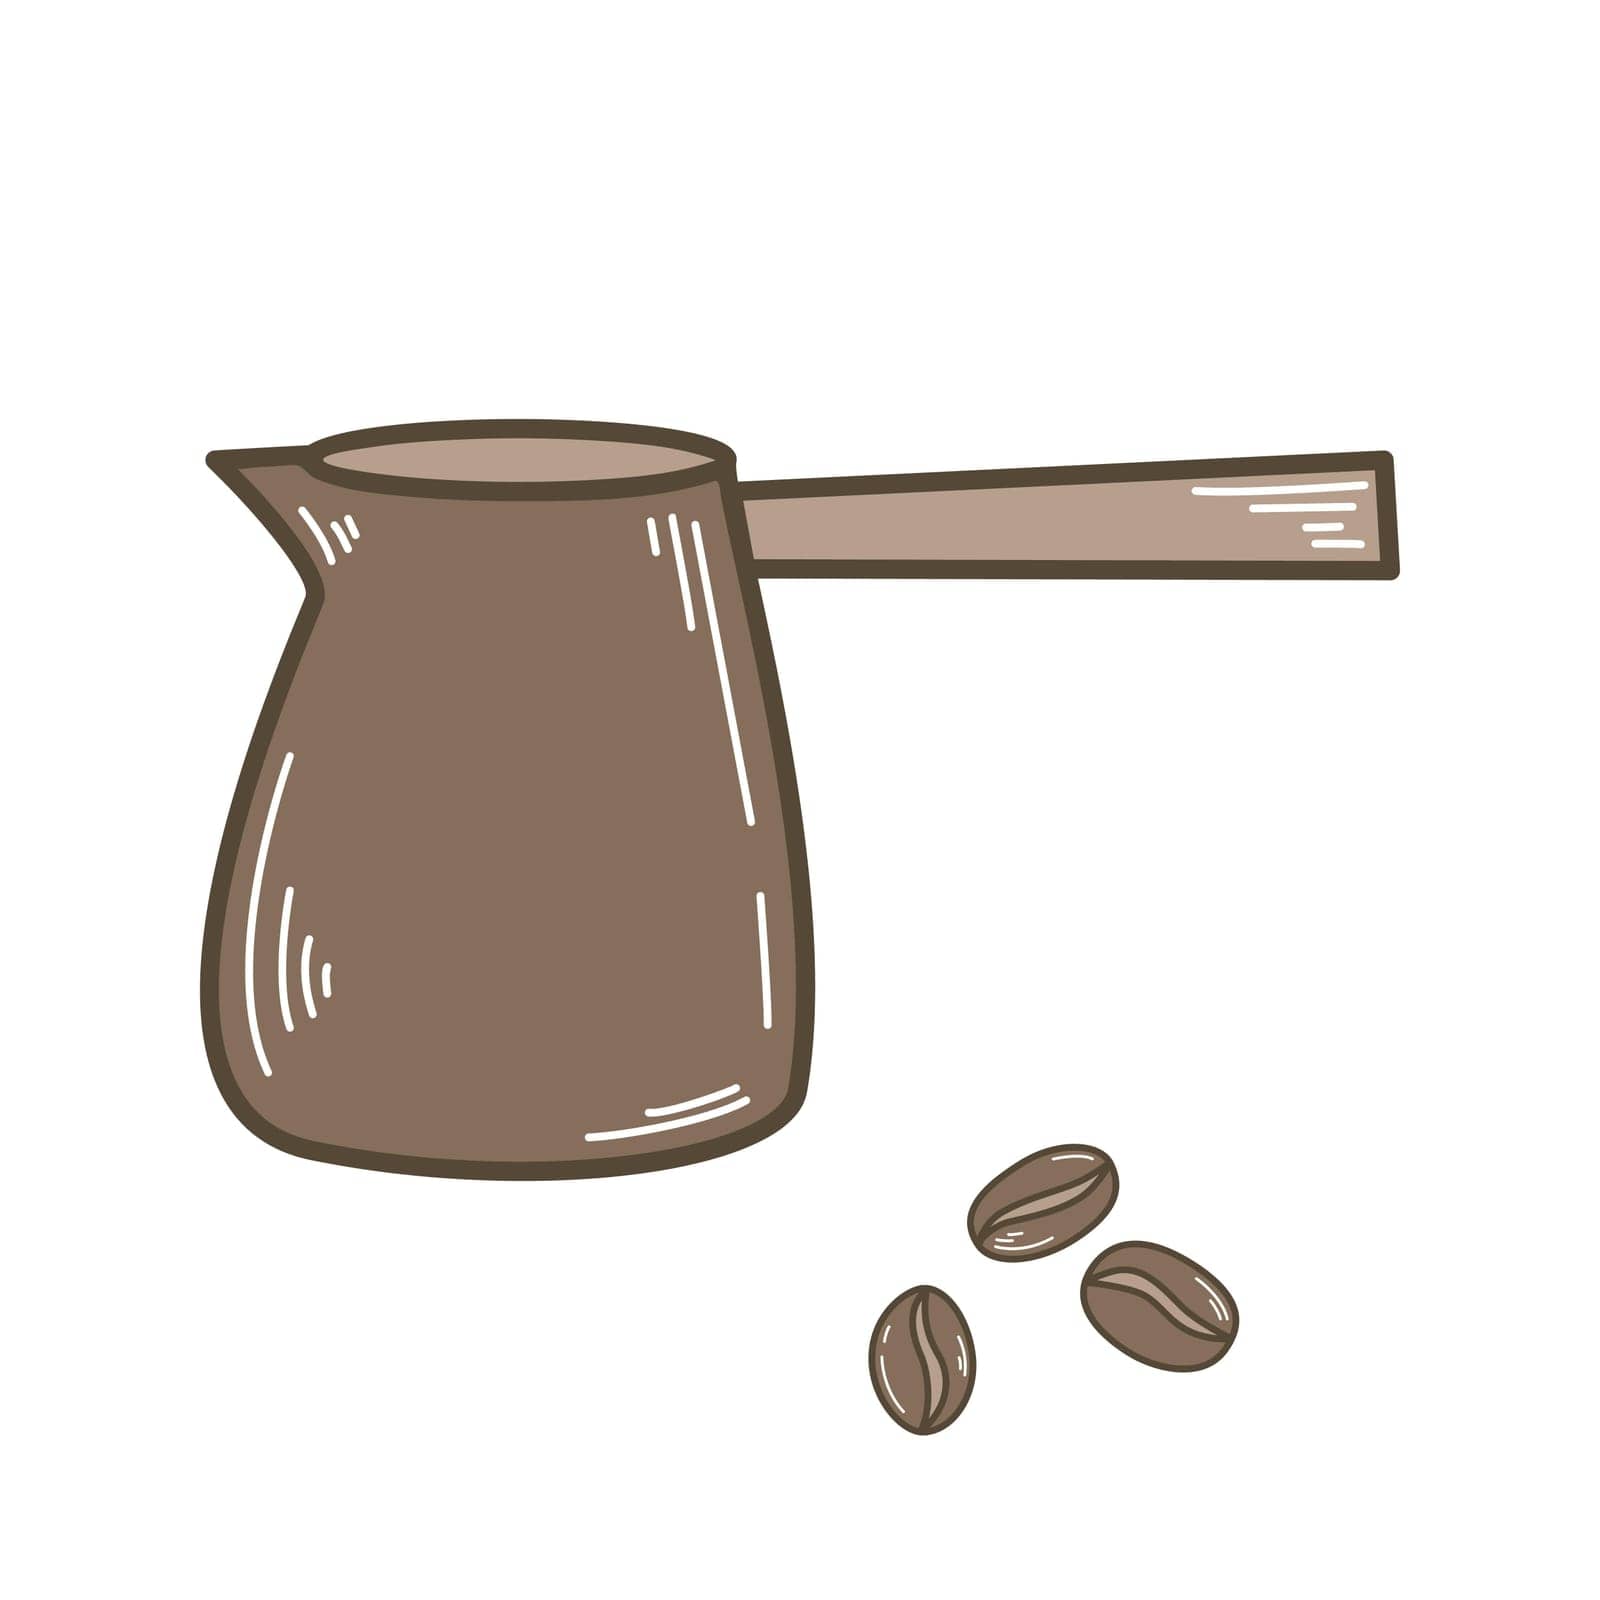 Coffee pot and coffee beans clip art by TassiaK